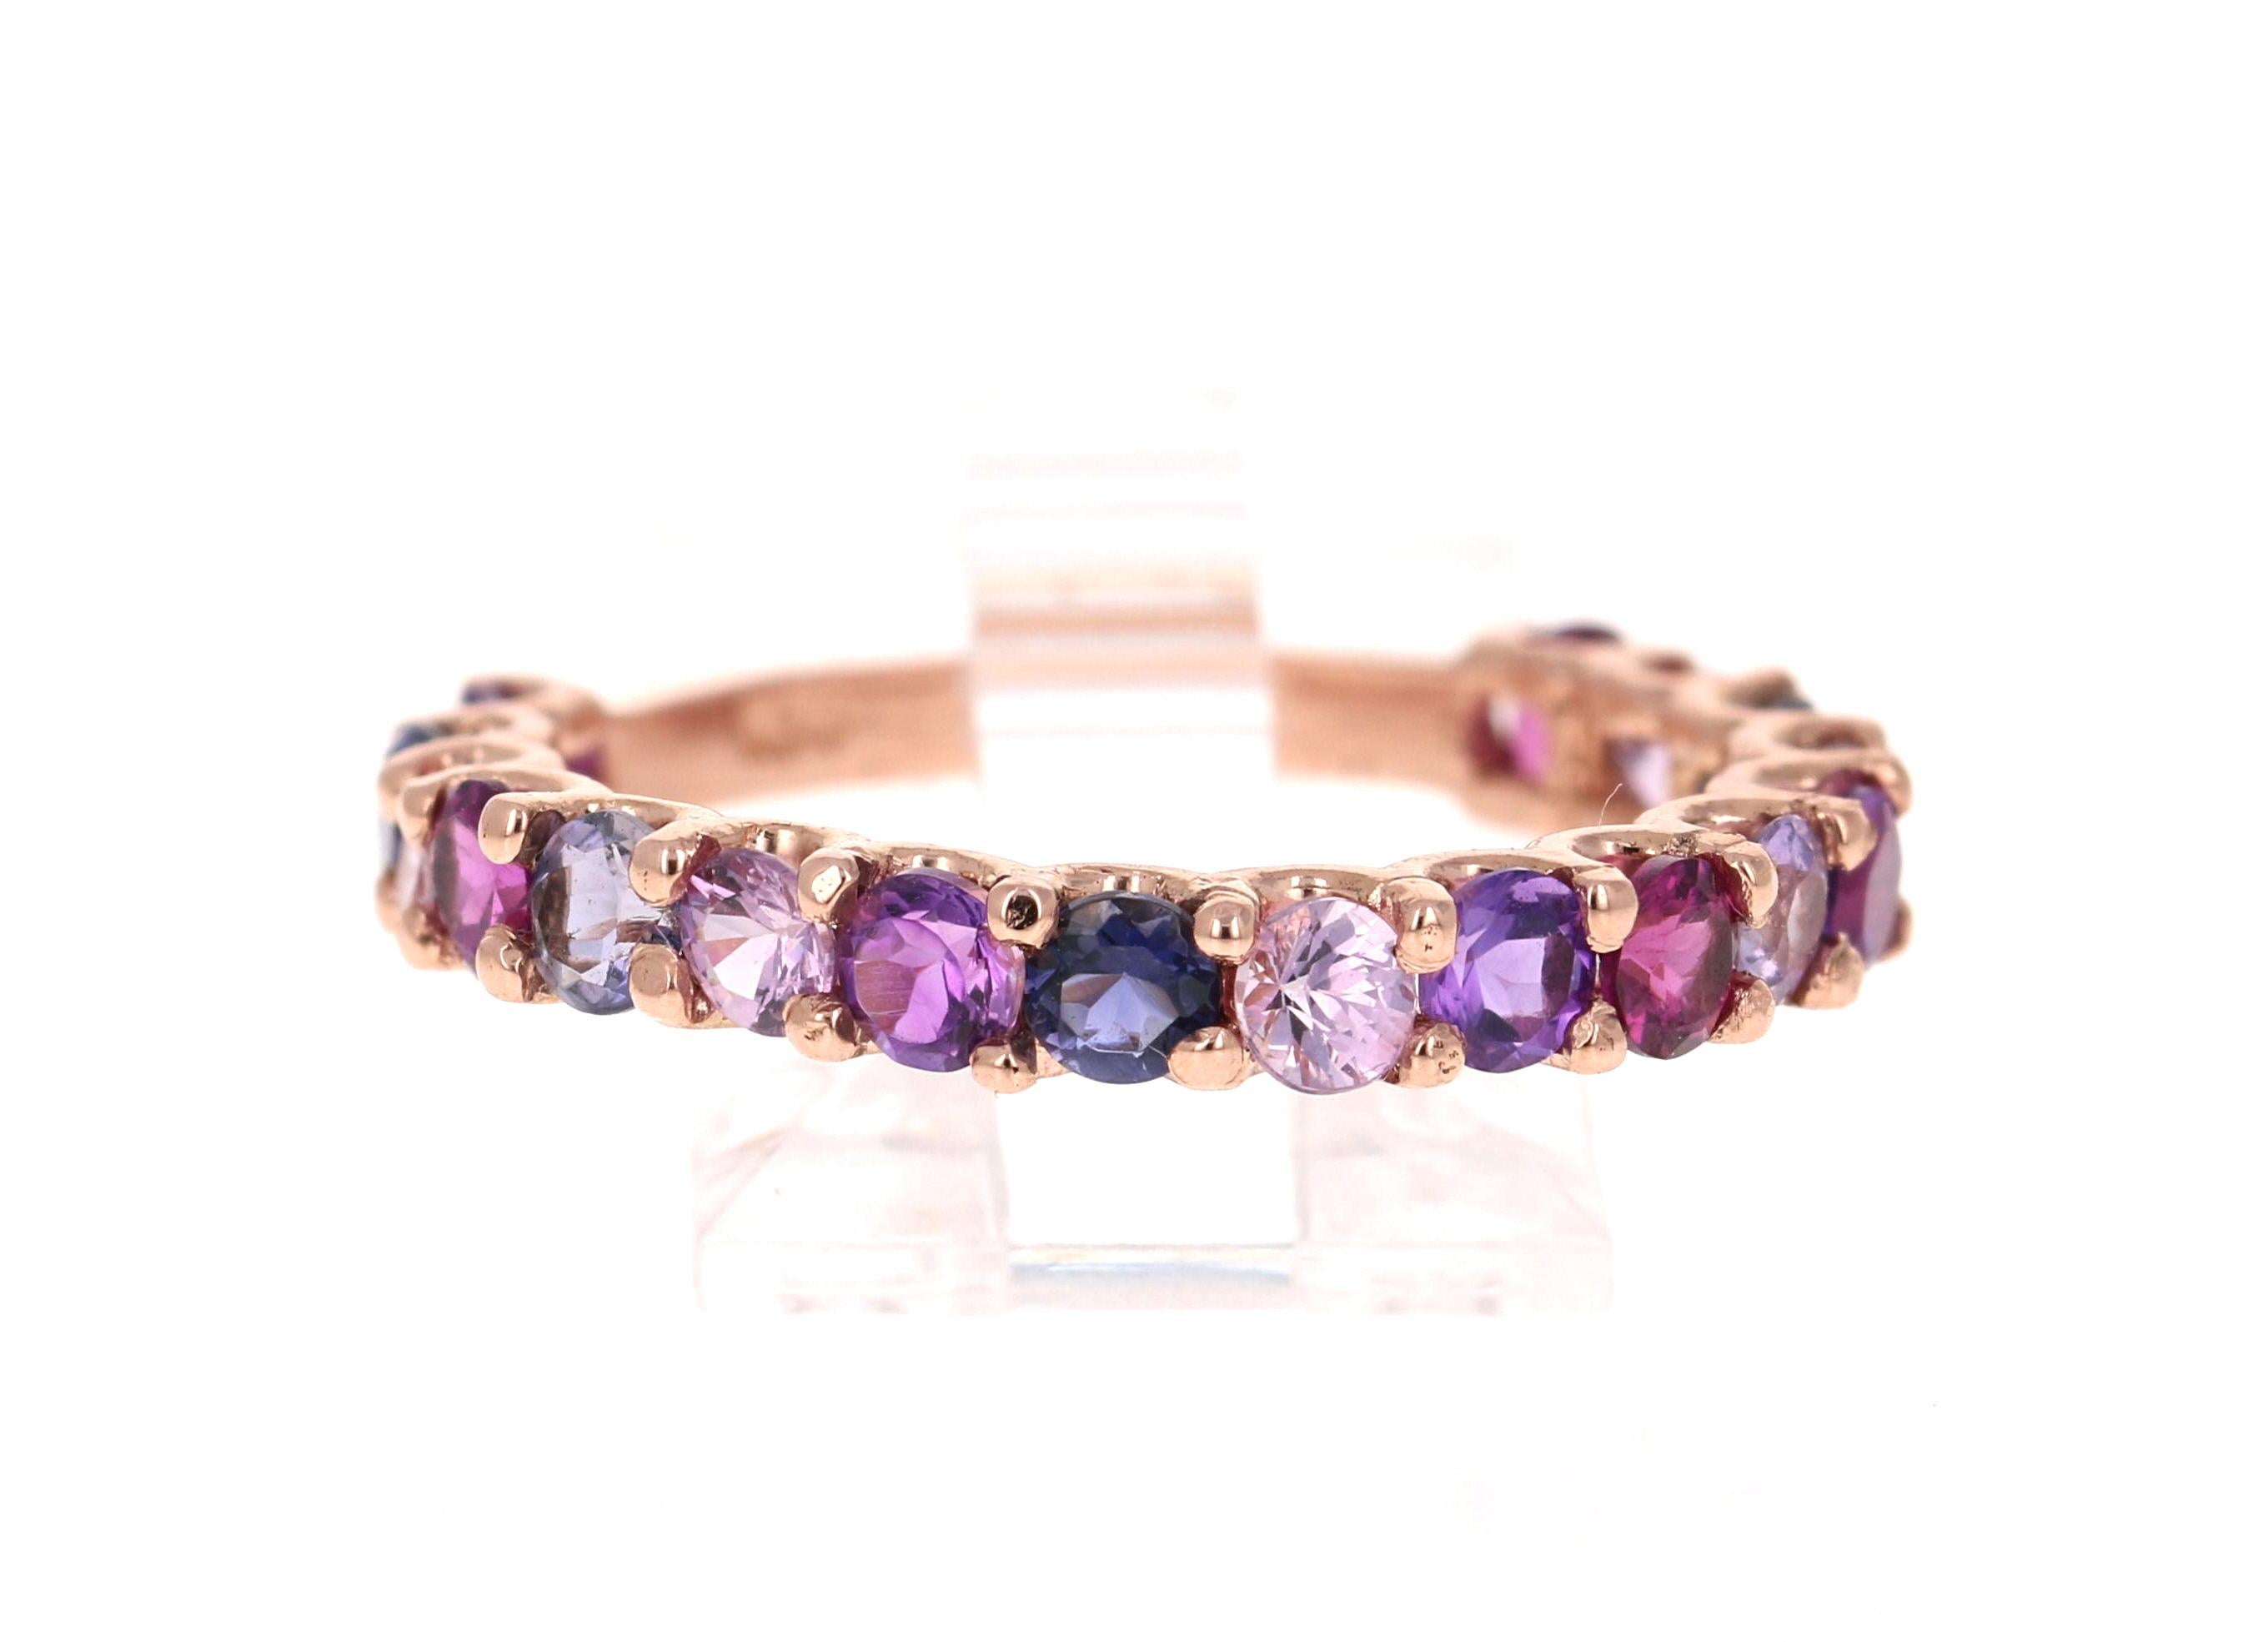 Multi Color Gemstone Rose Gold Stackable Band

There are 17 Multi Color Genuine Gemstones in this band that weigh 2.09 Carats. The band has a mixture of Pink Sapphires, Amethysts and Purple Garnets!
It is perfect for everyday wear and looks amazing